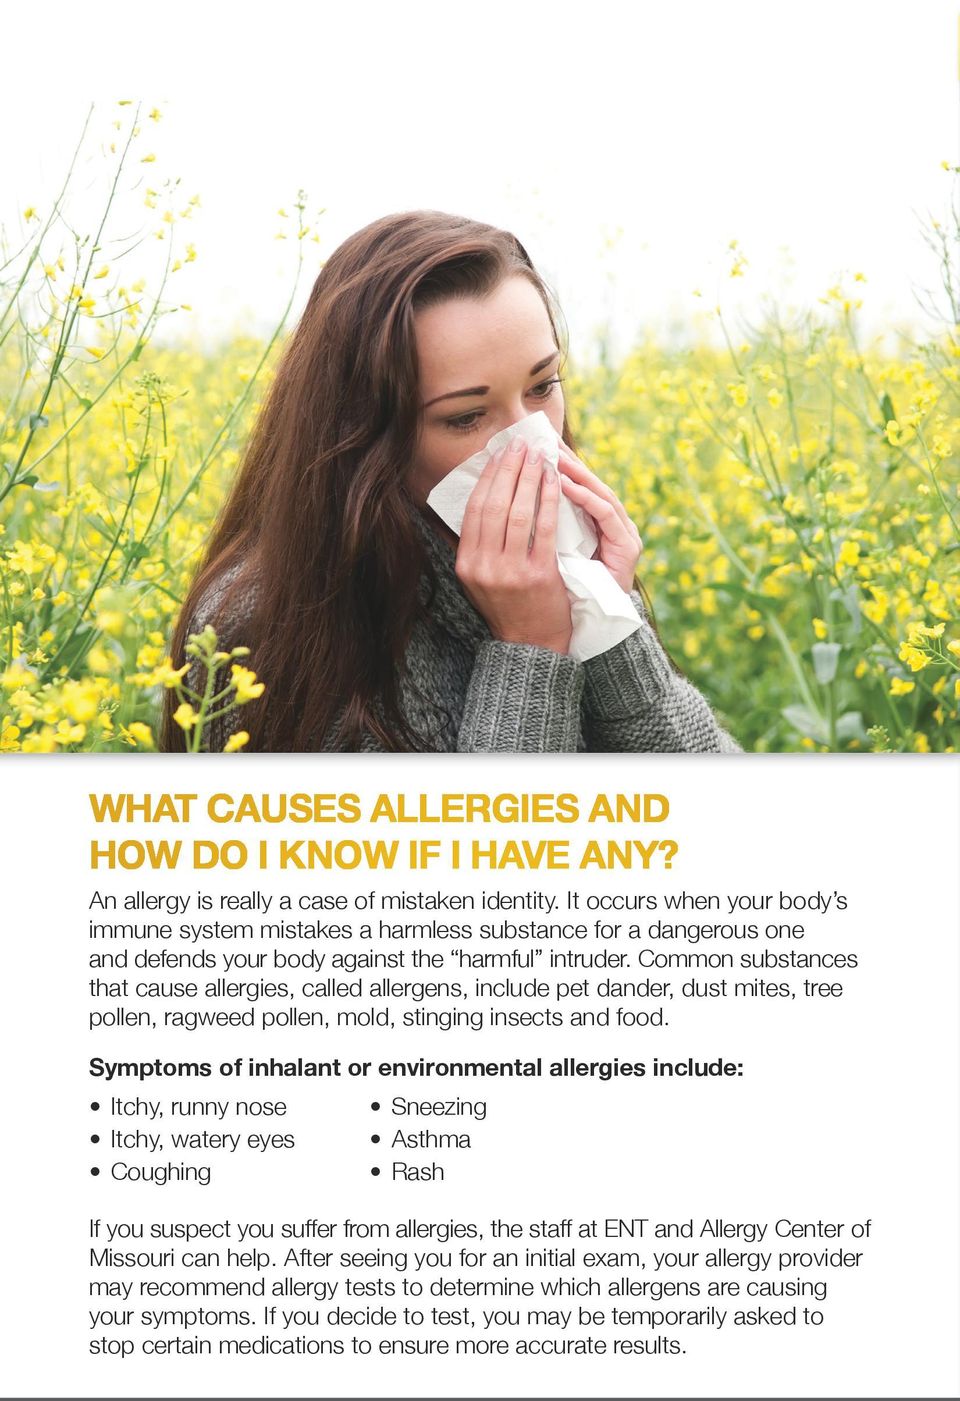 Common substances that cause allergies, called allergens, include pet dander, dust mites, tree pollen, ragweed pollen, mold, stinging insects and food.